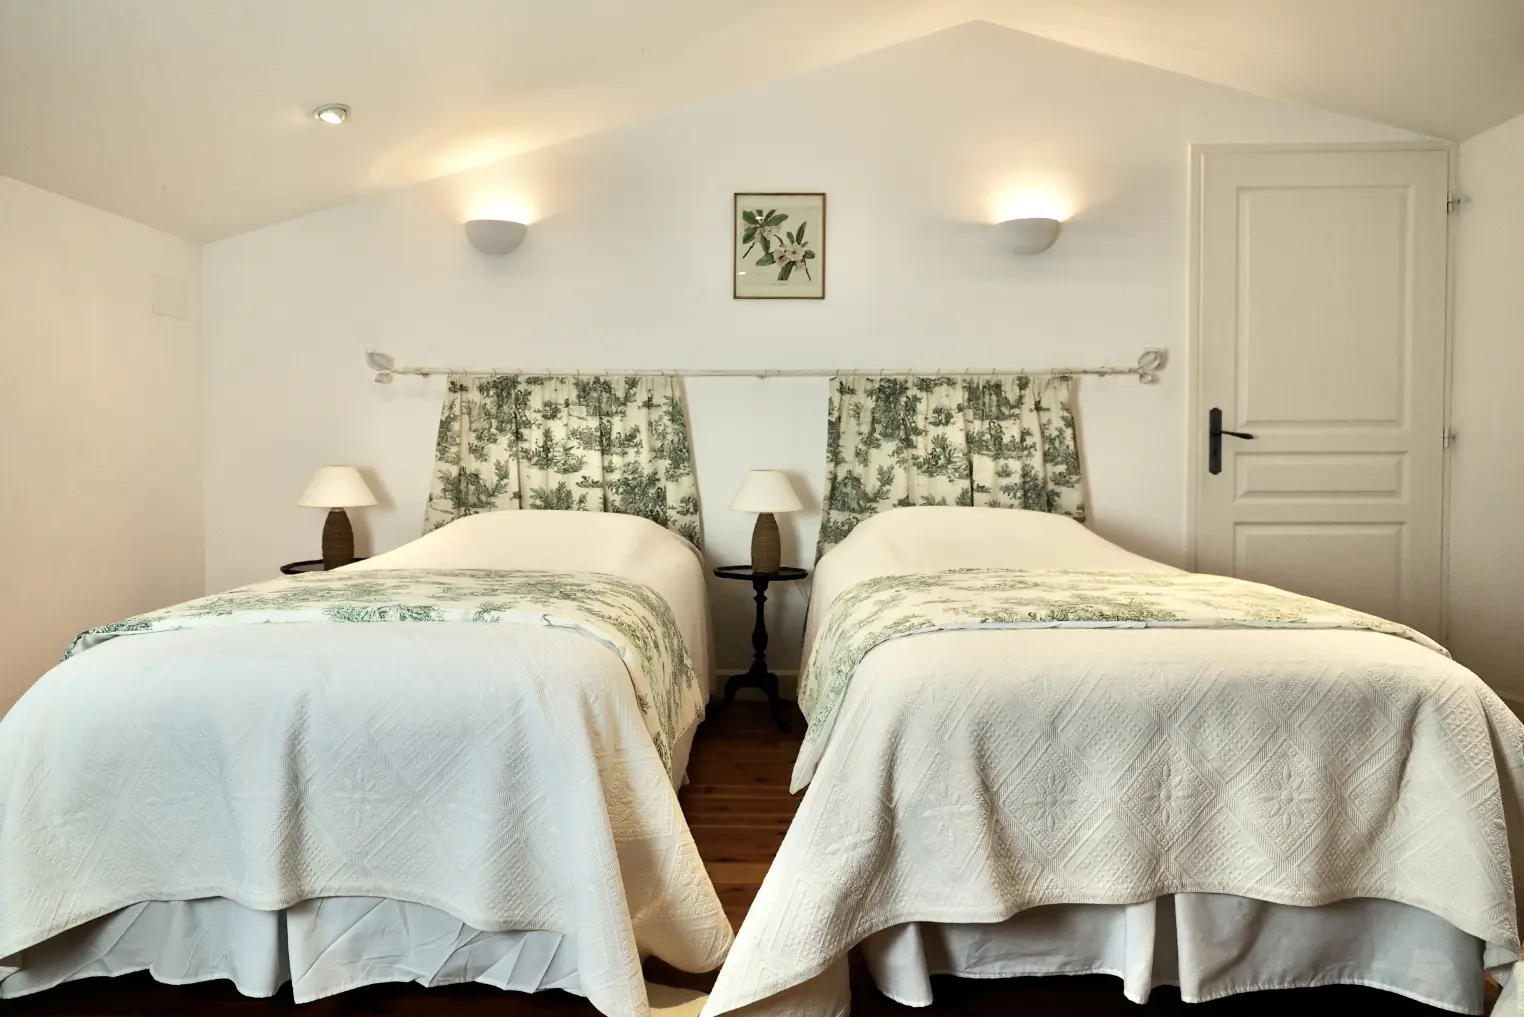 Ancolie Room bed and breakfast in Charente.